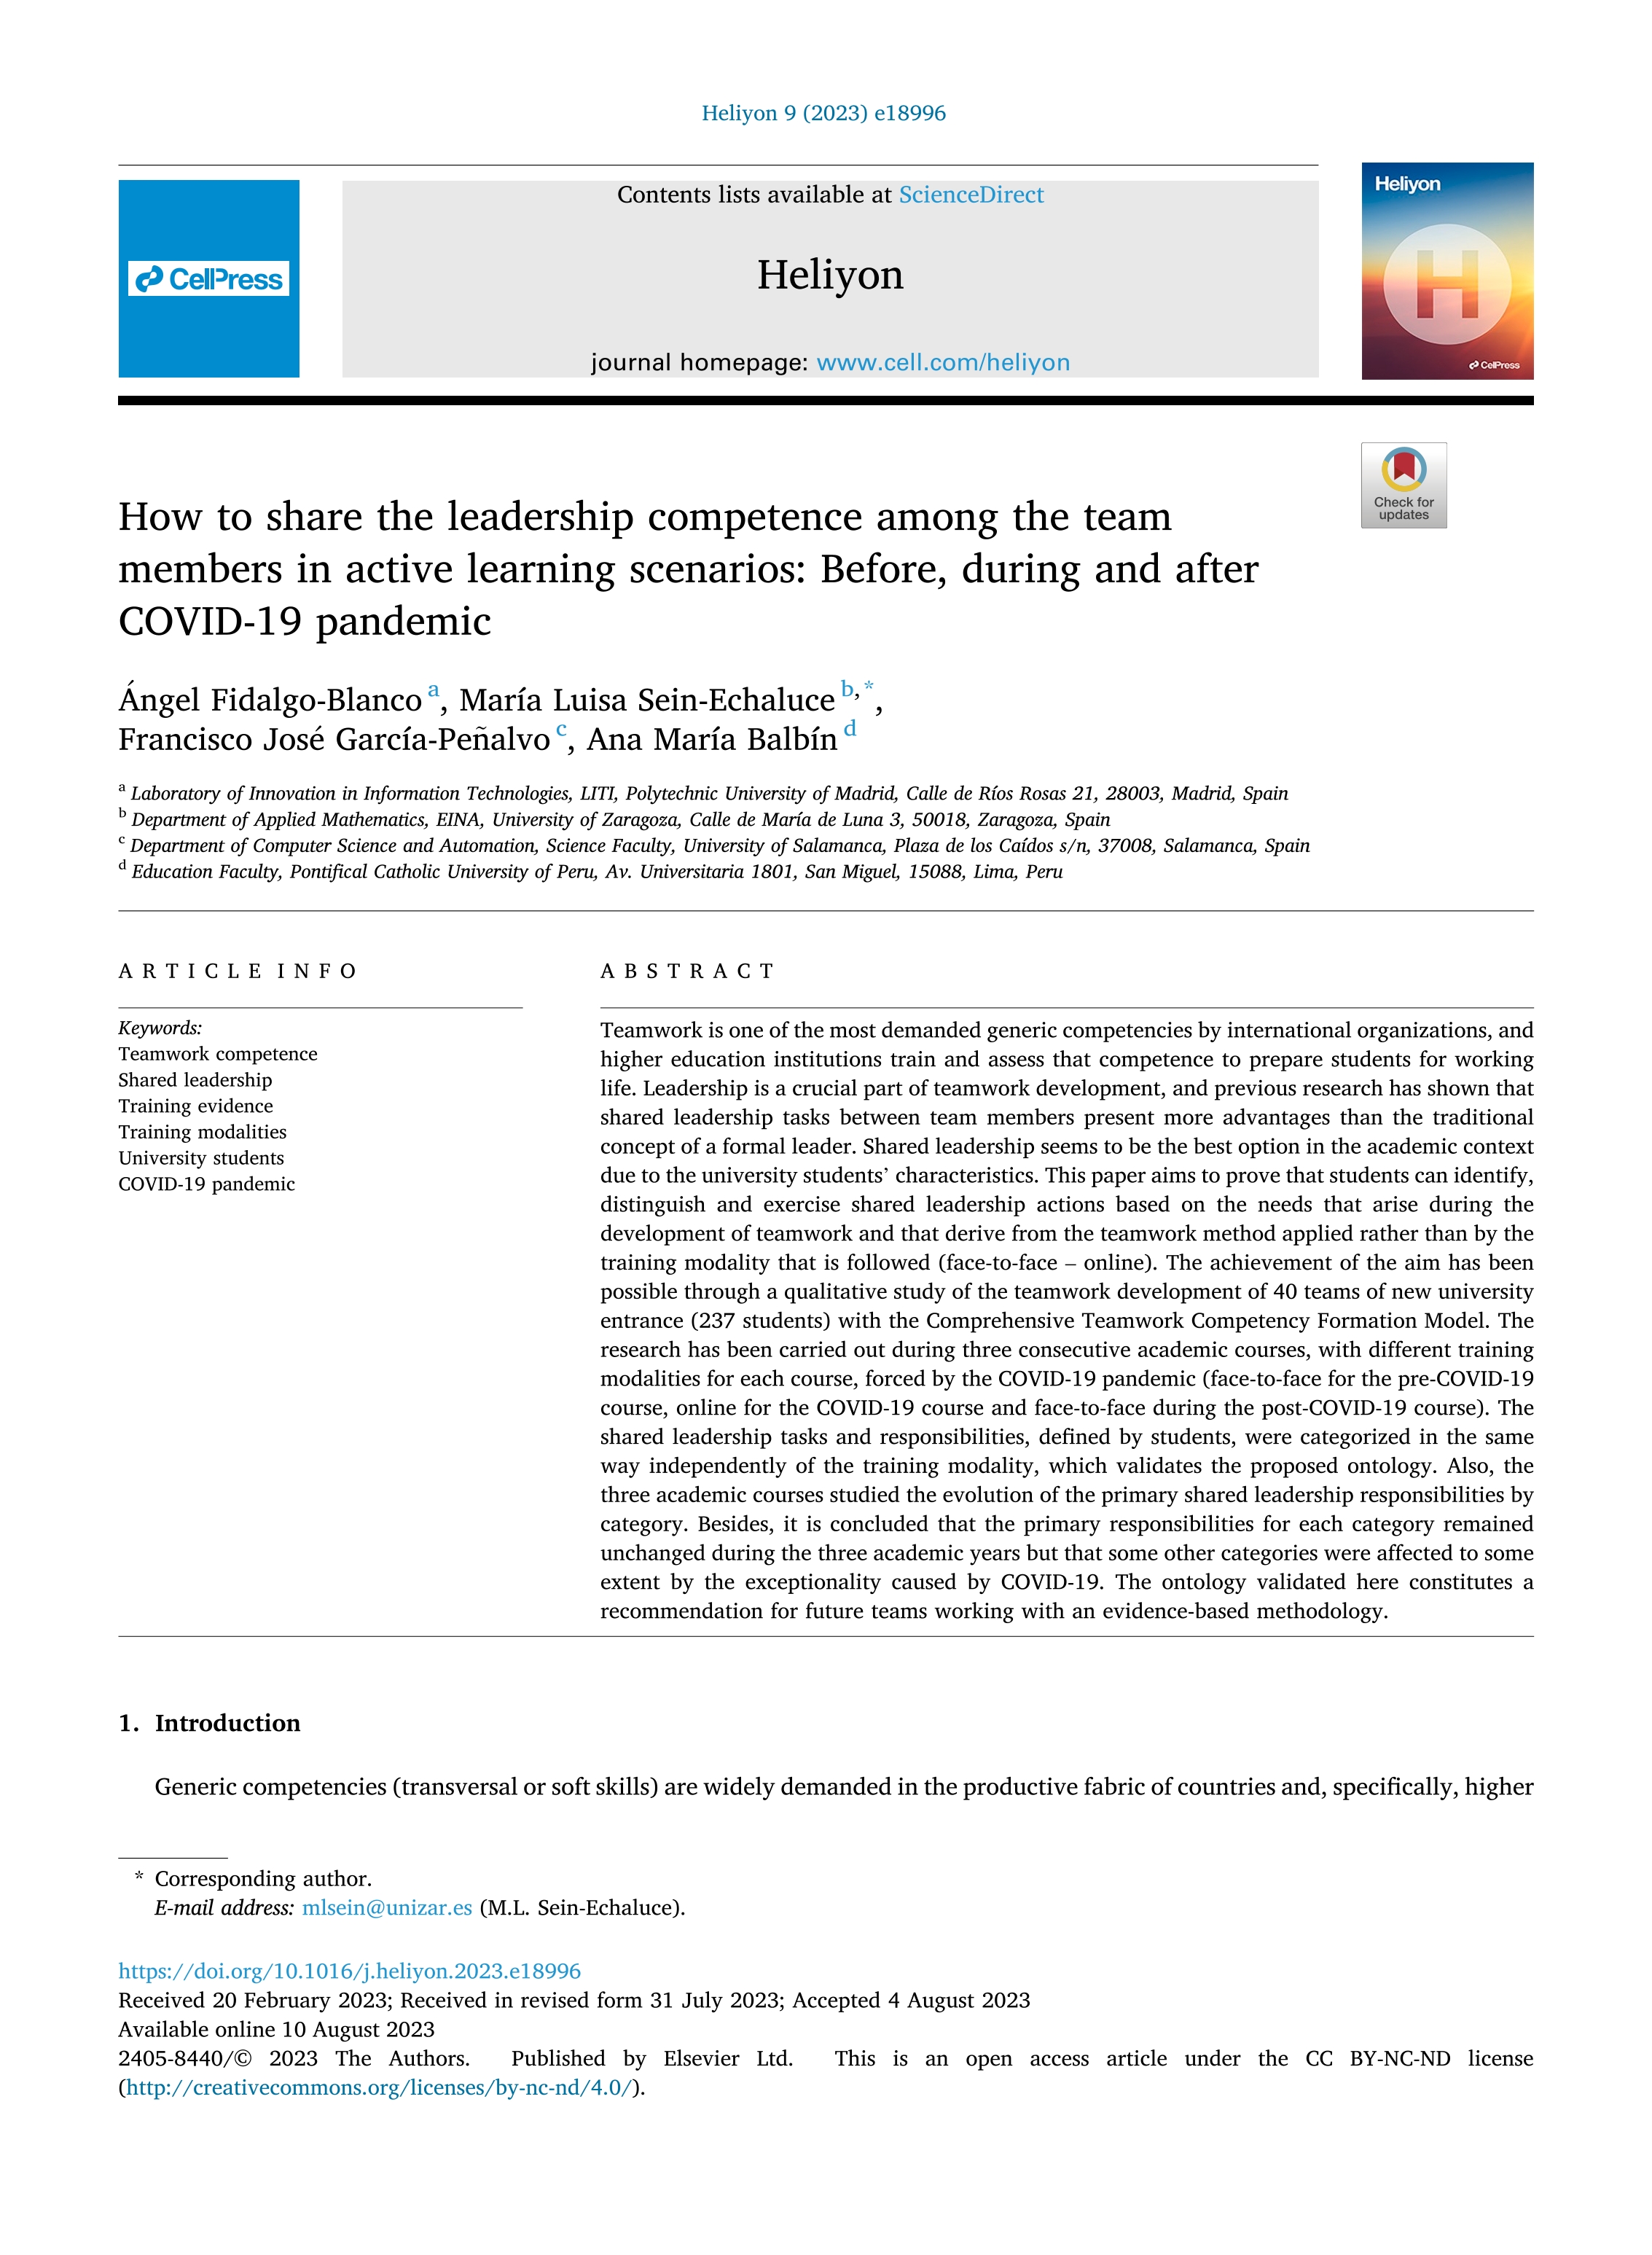 How to share the leadership competence among the team members in active learning scenarios: Before, during and after COVID-19 pandemic